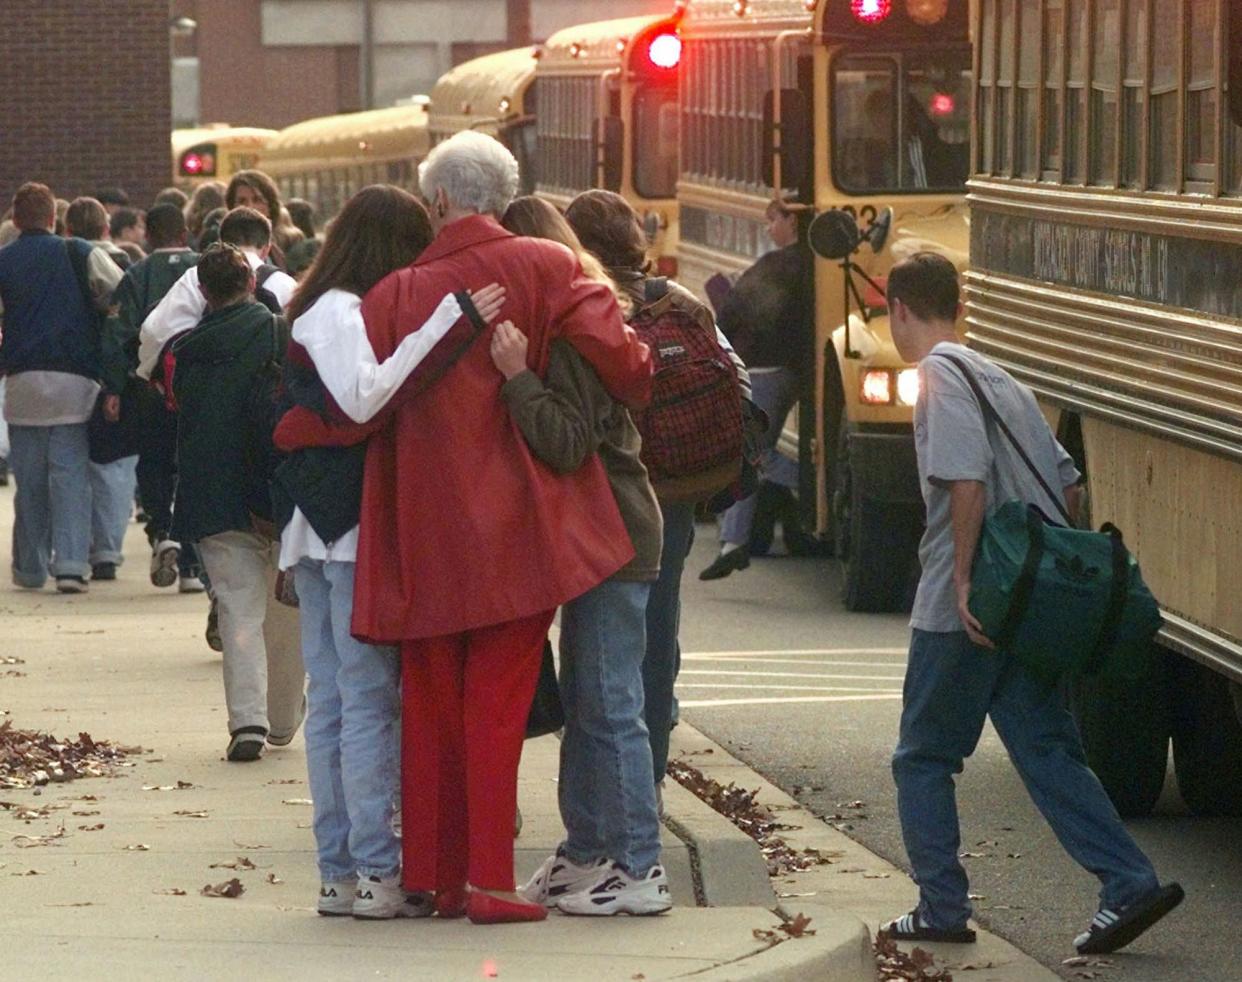 FILE - Students arriving at Heath High School in West Paducah, Ky., embrace an unidentified adult on Tuesday, Dec. 2, 1997, after student Michael Carneal opened fire at the school the day before, leaving three students dead and five wounded. 